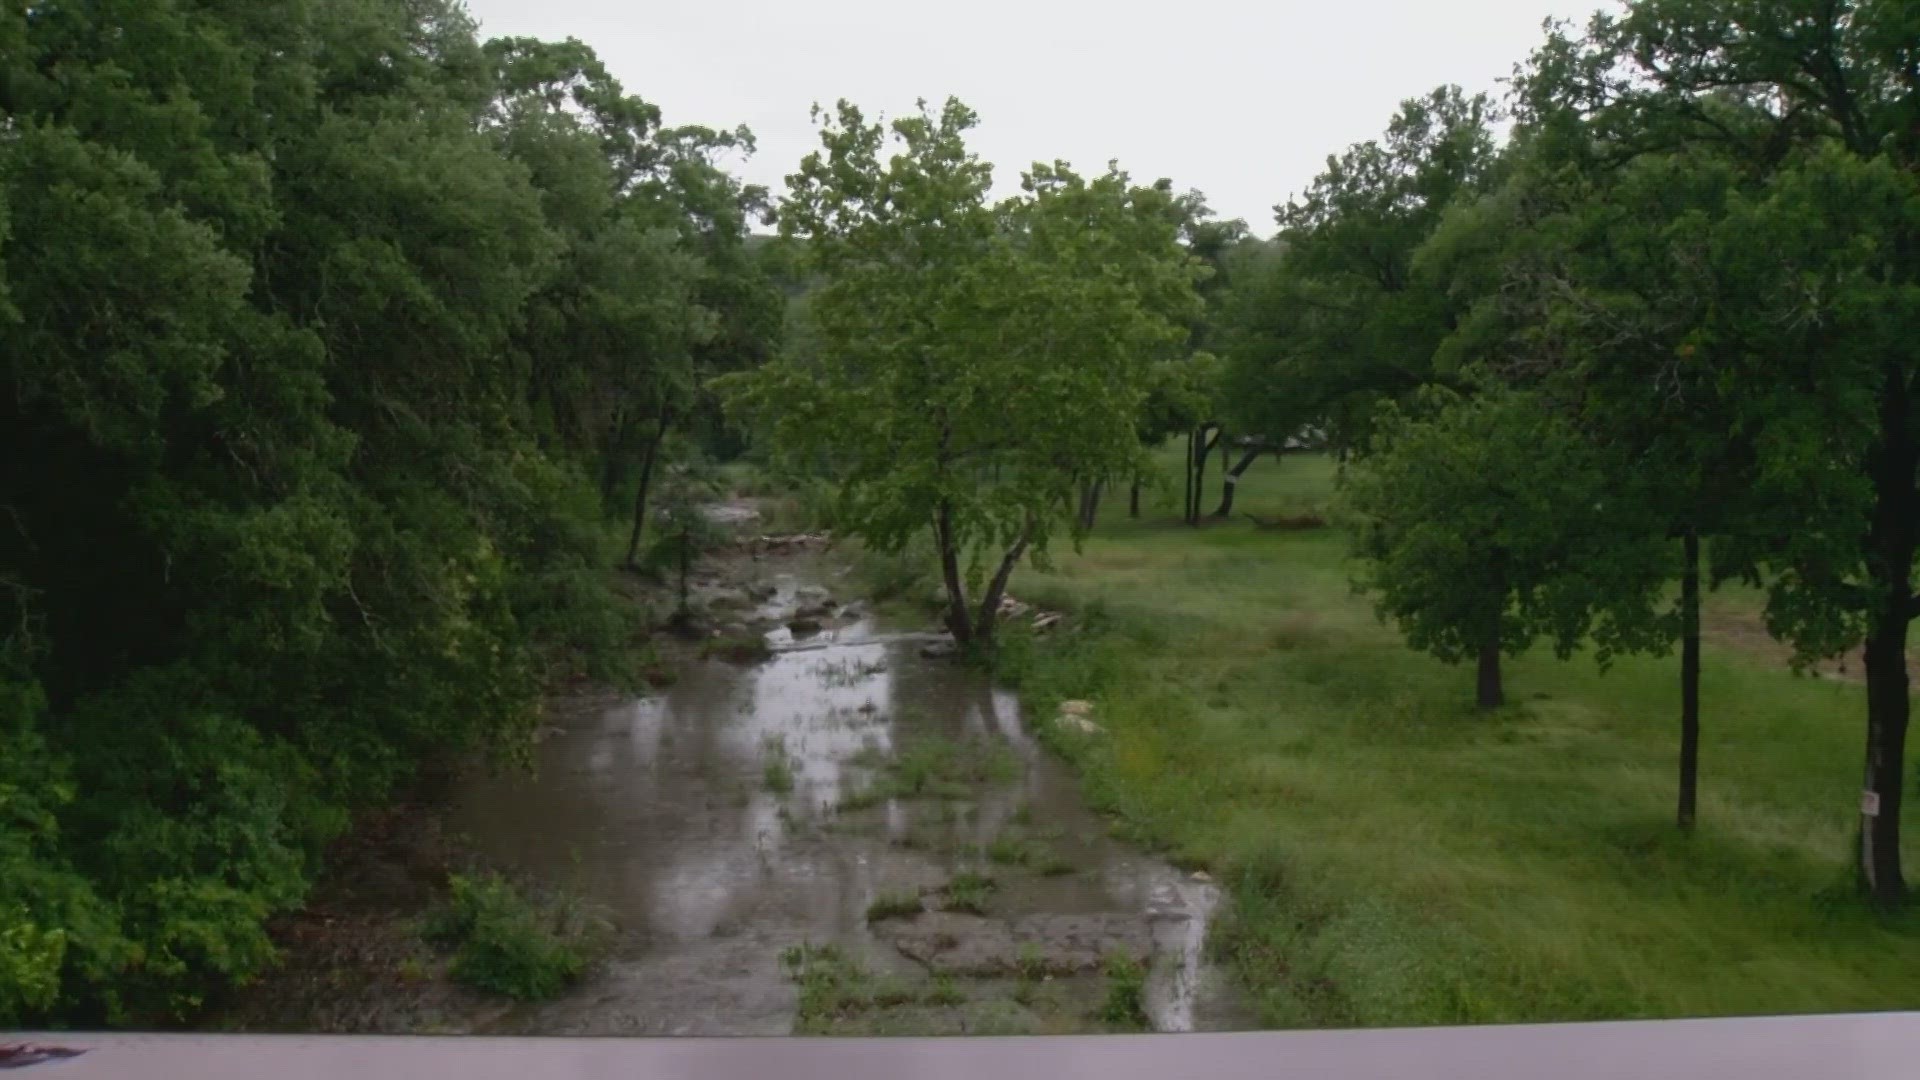 The company is looking to install a treatment plant that would release up to 1 million gallons of effluent into Helotes Creek every day.